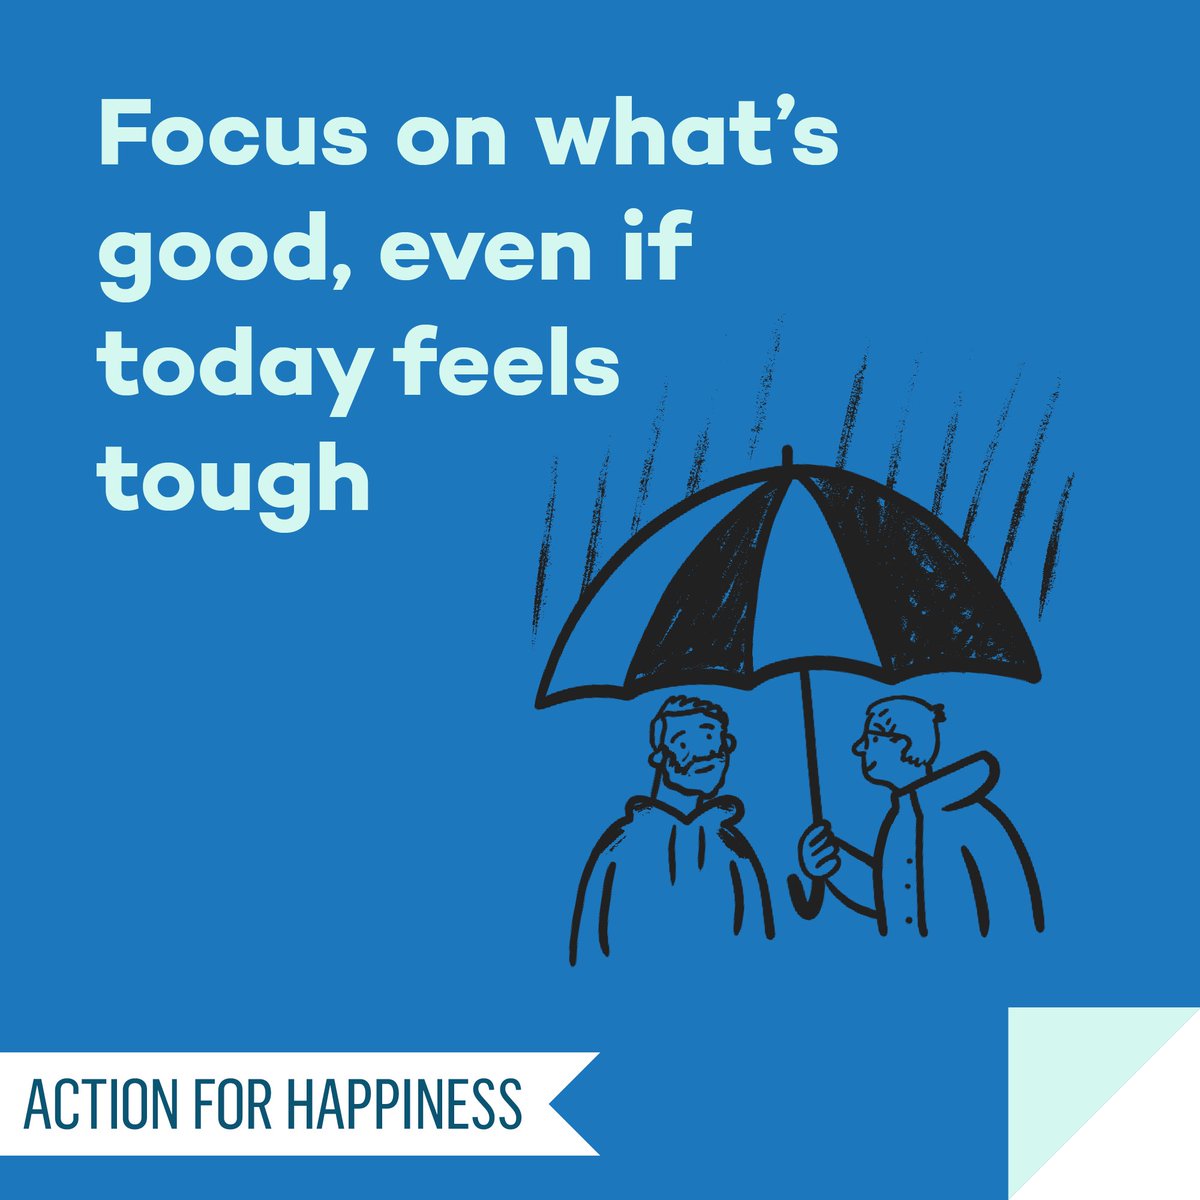 Happier January - Day 19: Focus on what’s good, even if today feels tough actionforhappiness.org/january #HappierJanuary